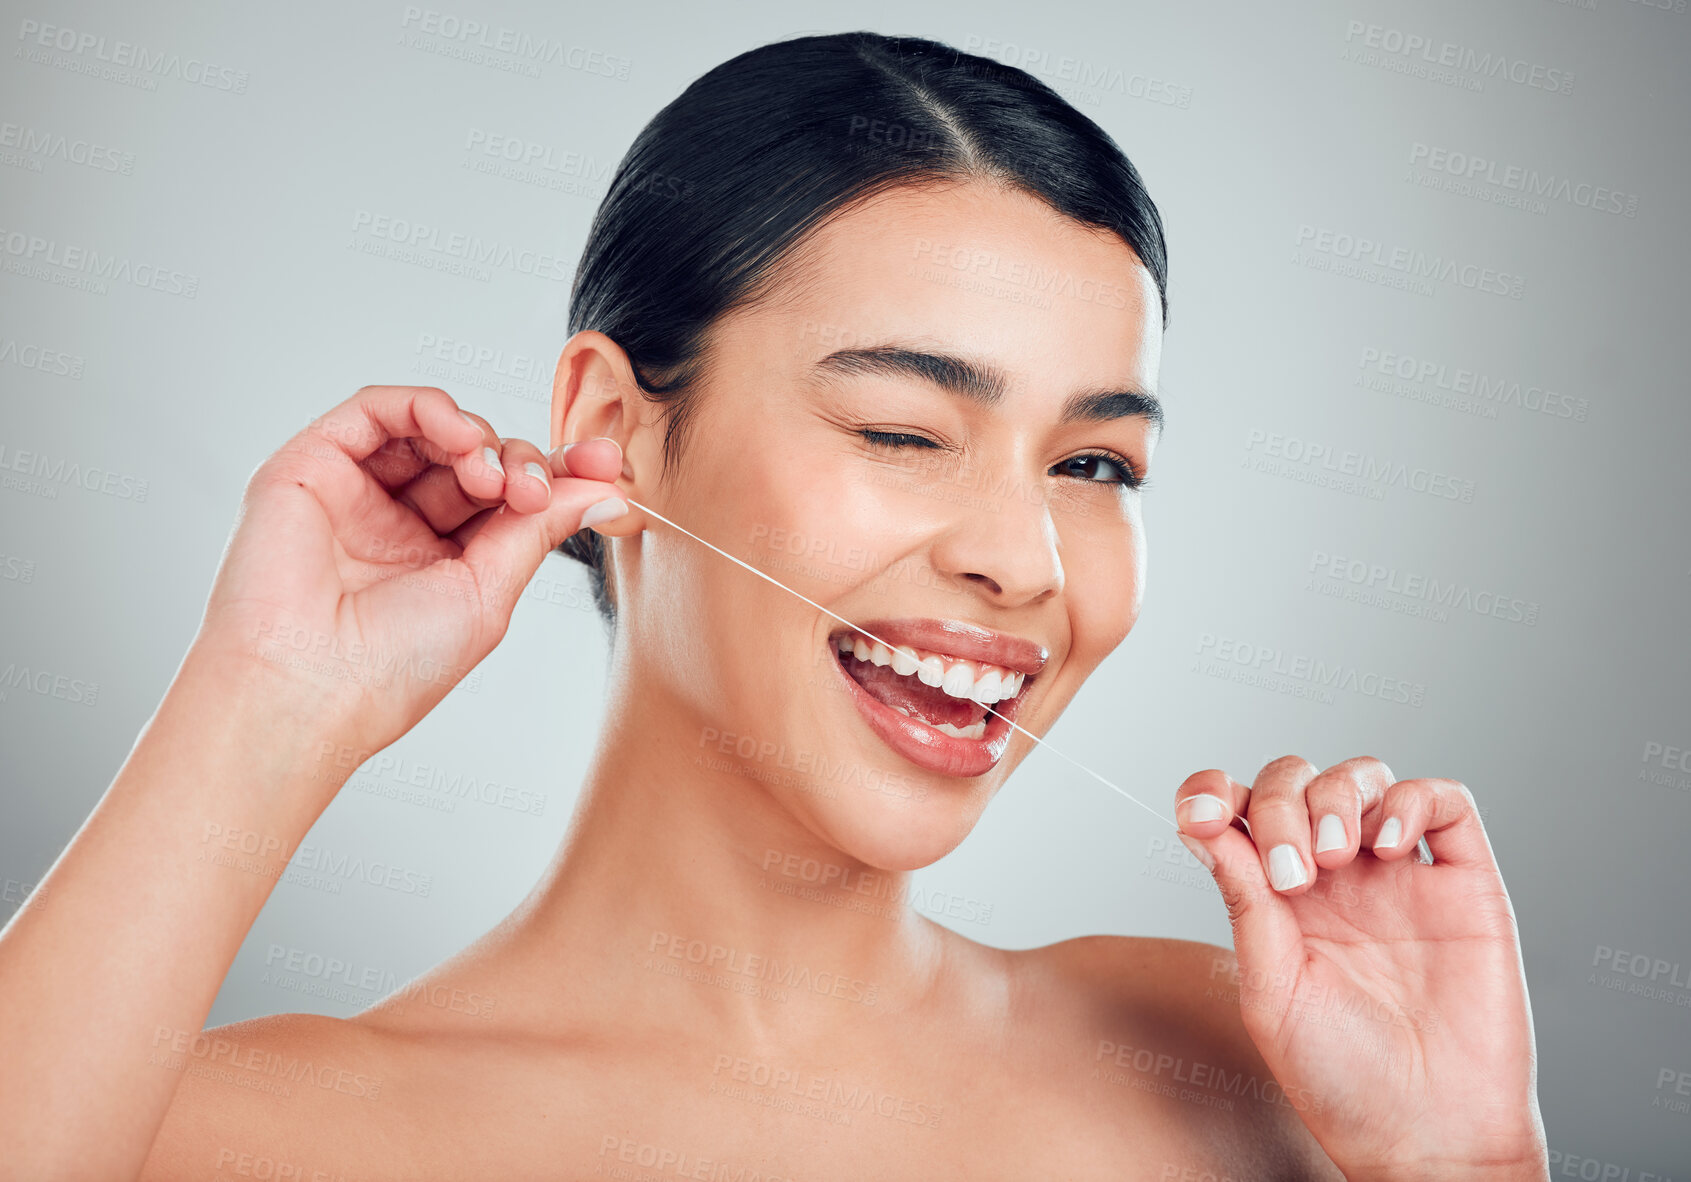 Buy stock photo Studio portrait of a smiling mixed race young woman with glowing skin posing against grey copyspace background while flossing her teeth for fresh breath. Hispanic model using floss to prevent a cavity